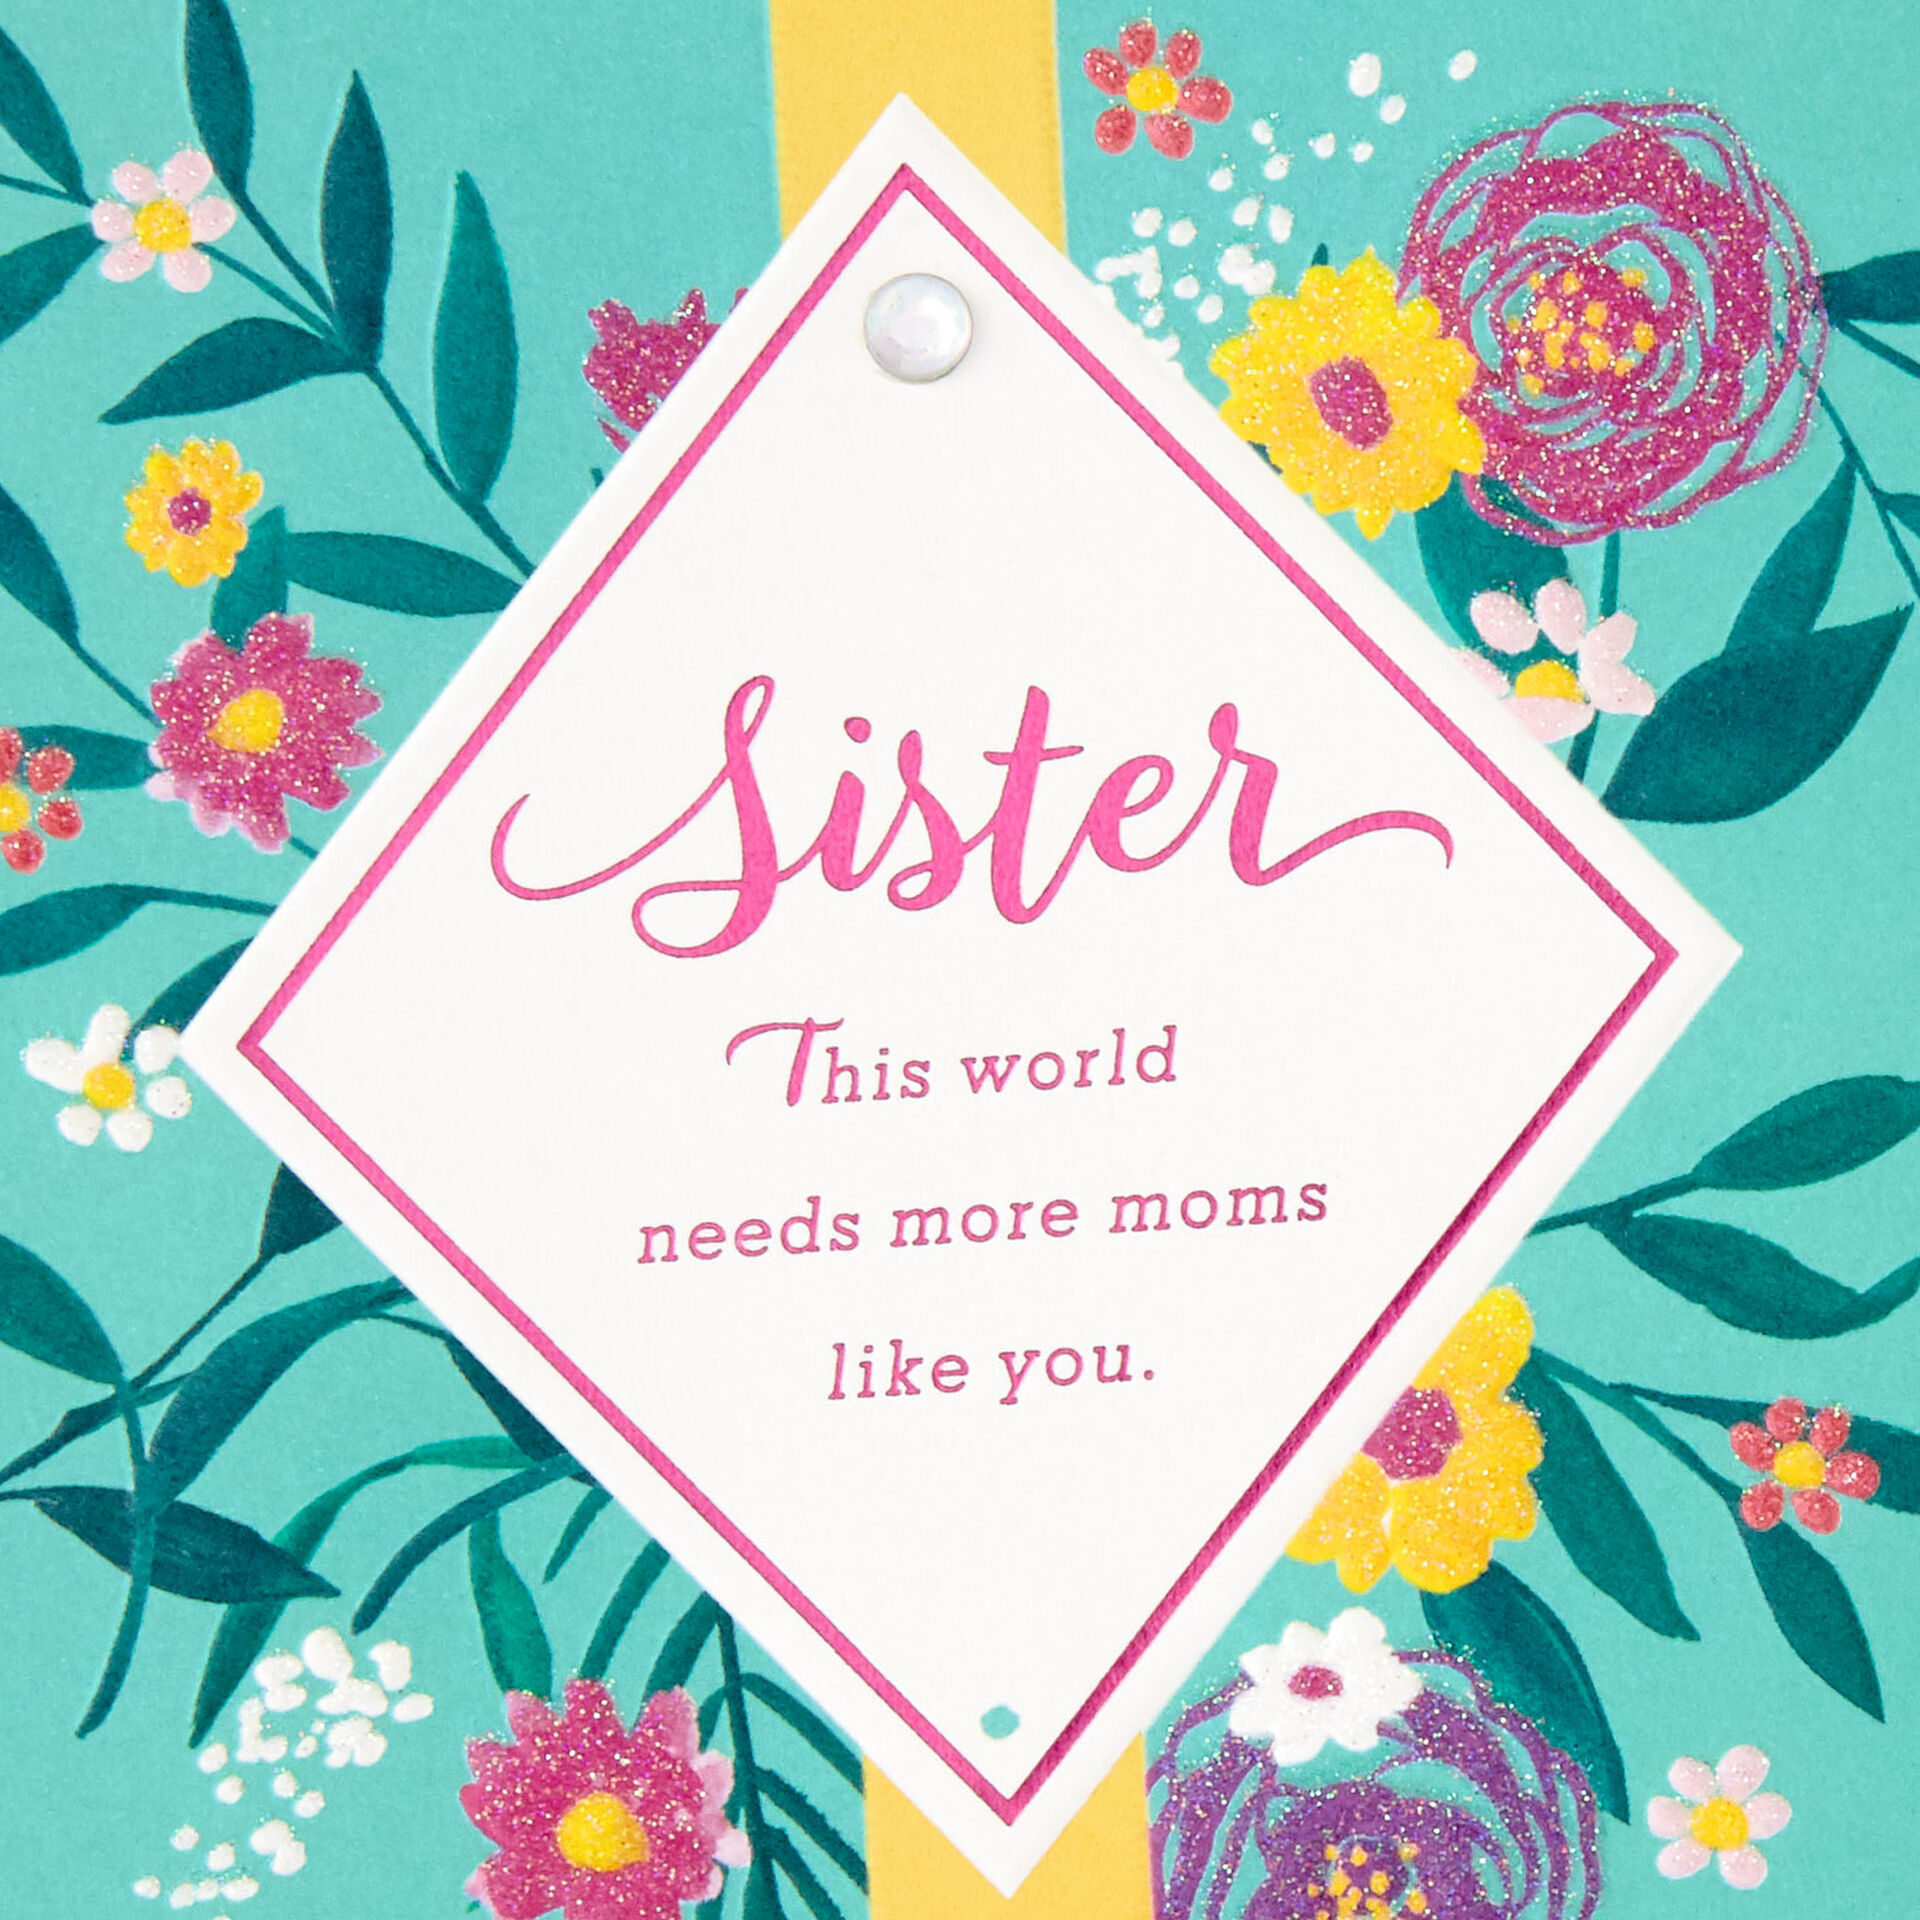 the-world-needs-more-moms-like-you-mother-s-day-card-for-sister